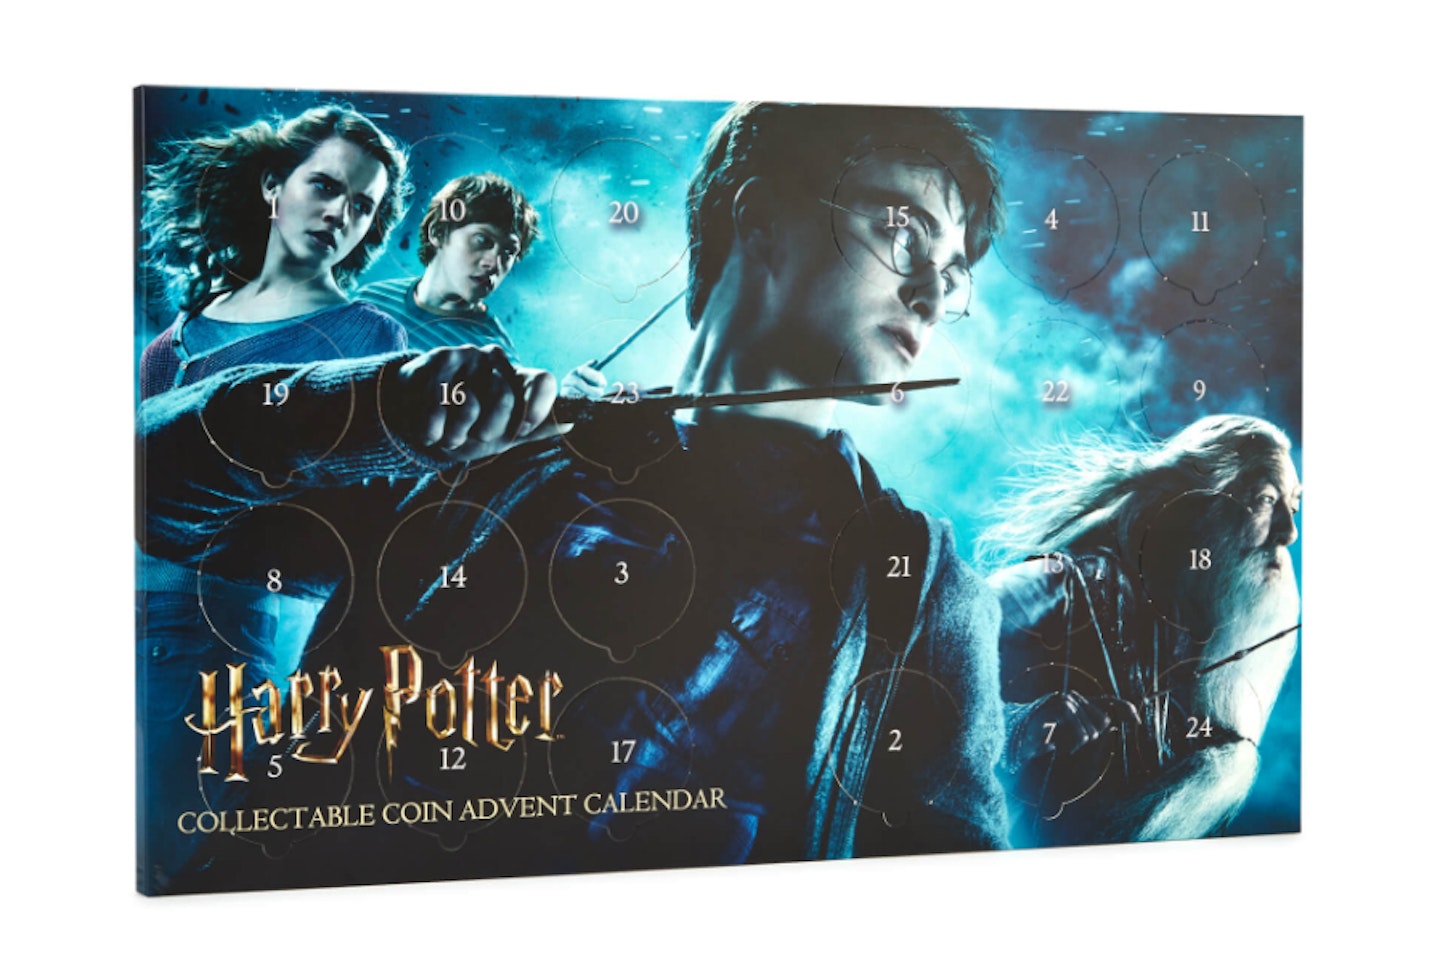 Harry Potter Limited Edition Collectable Coin Advent Calendar, £59.99